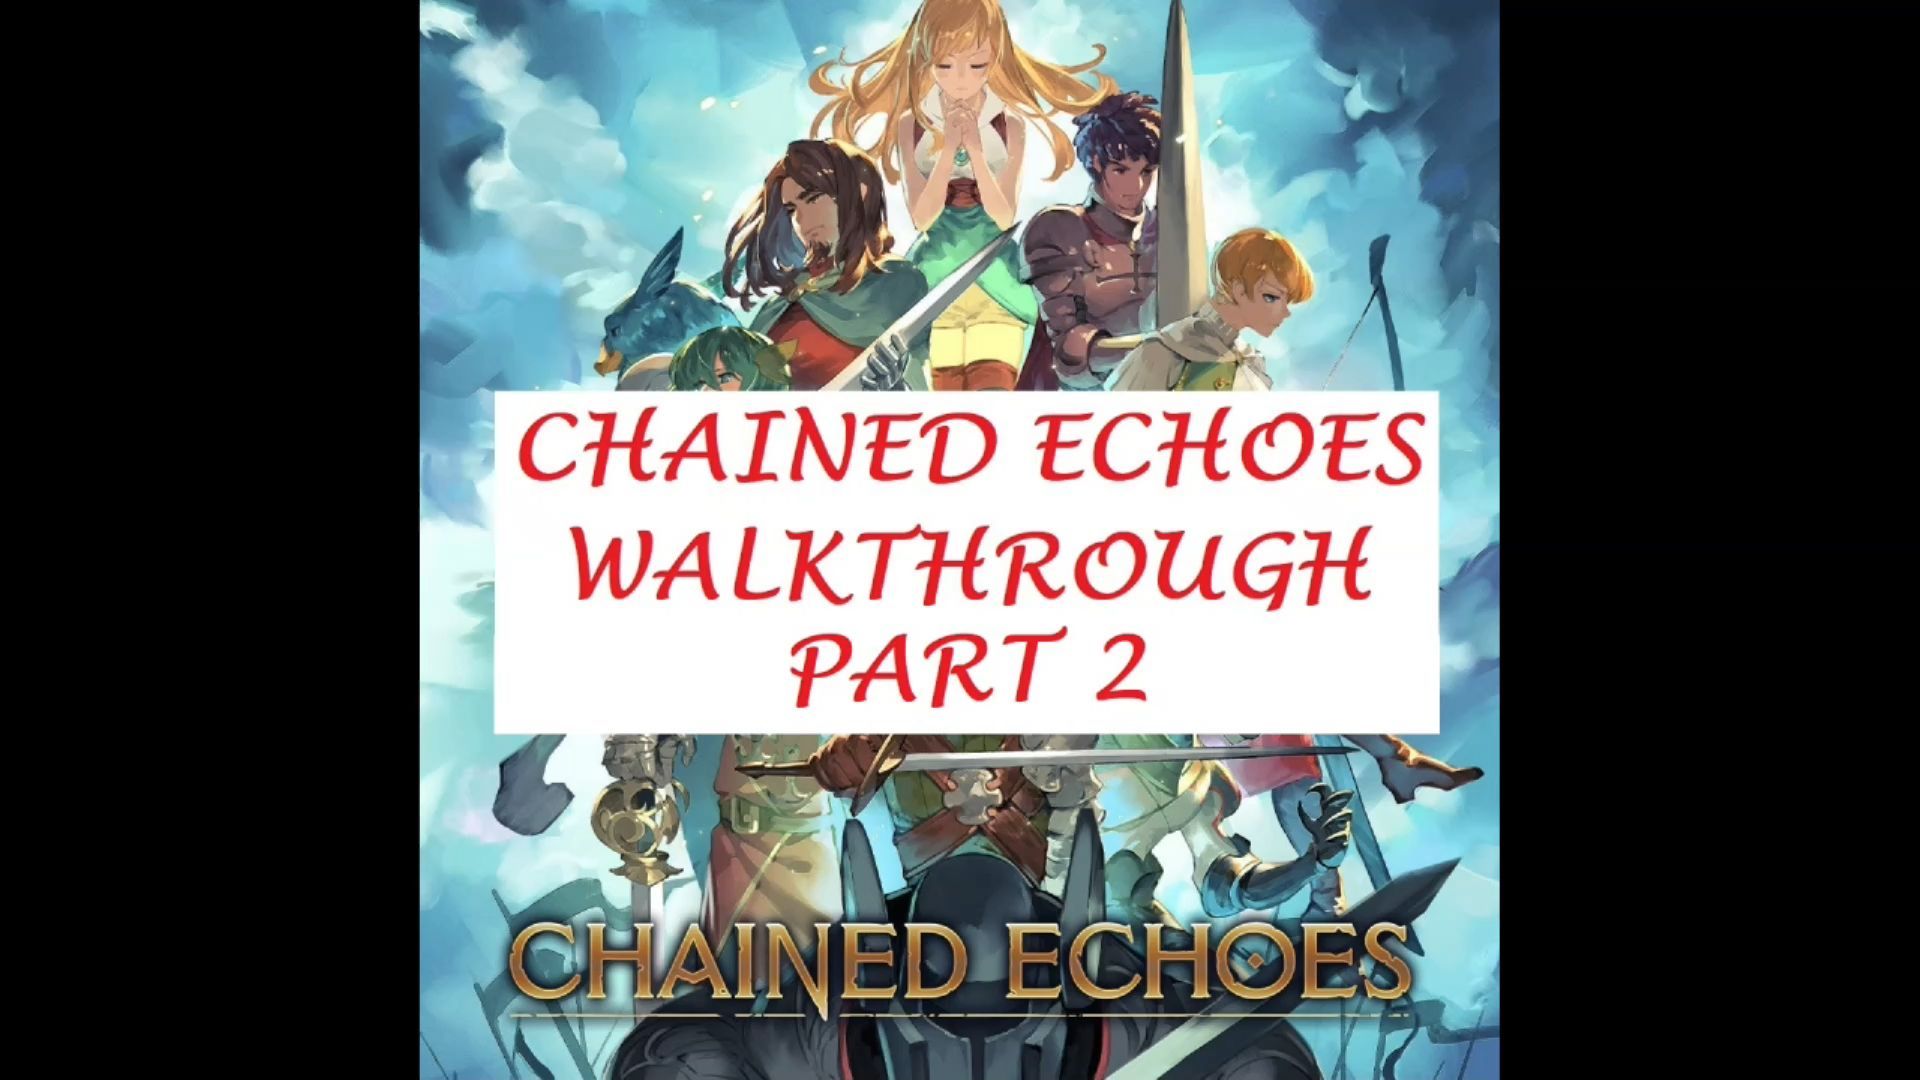 CHAINED ECHOES Gameplay (no commentary) 